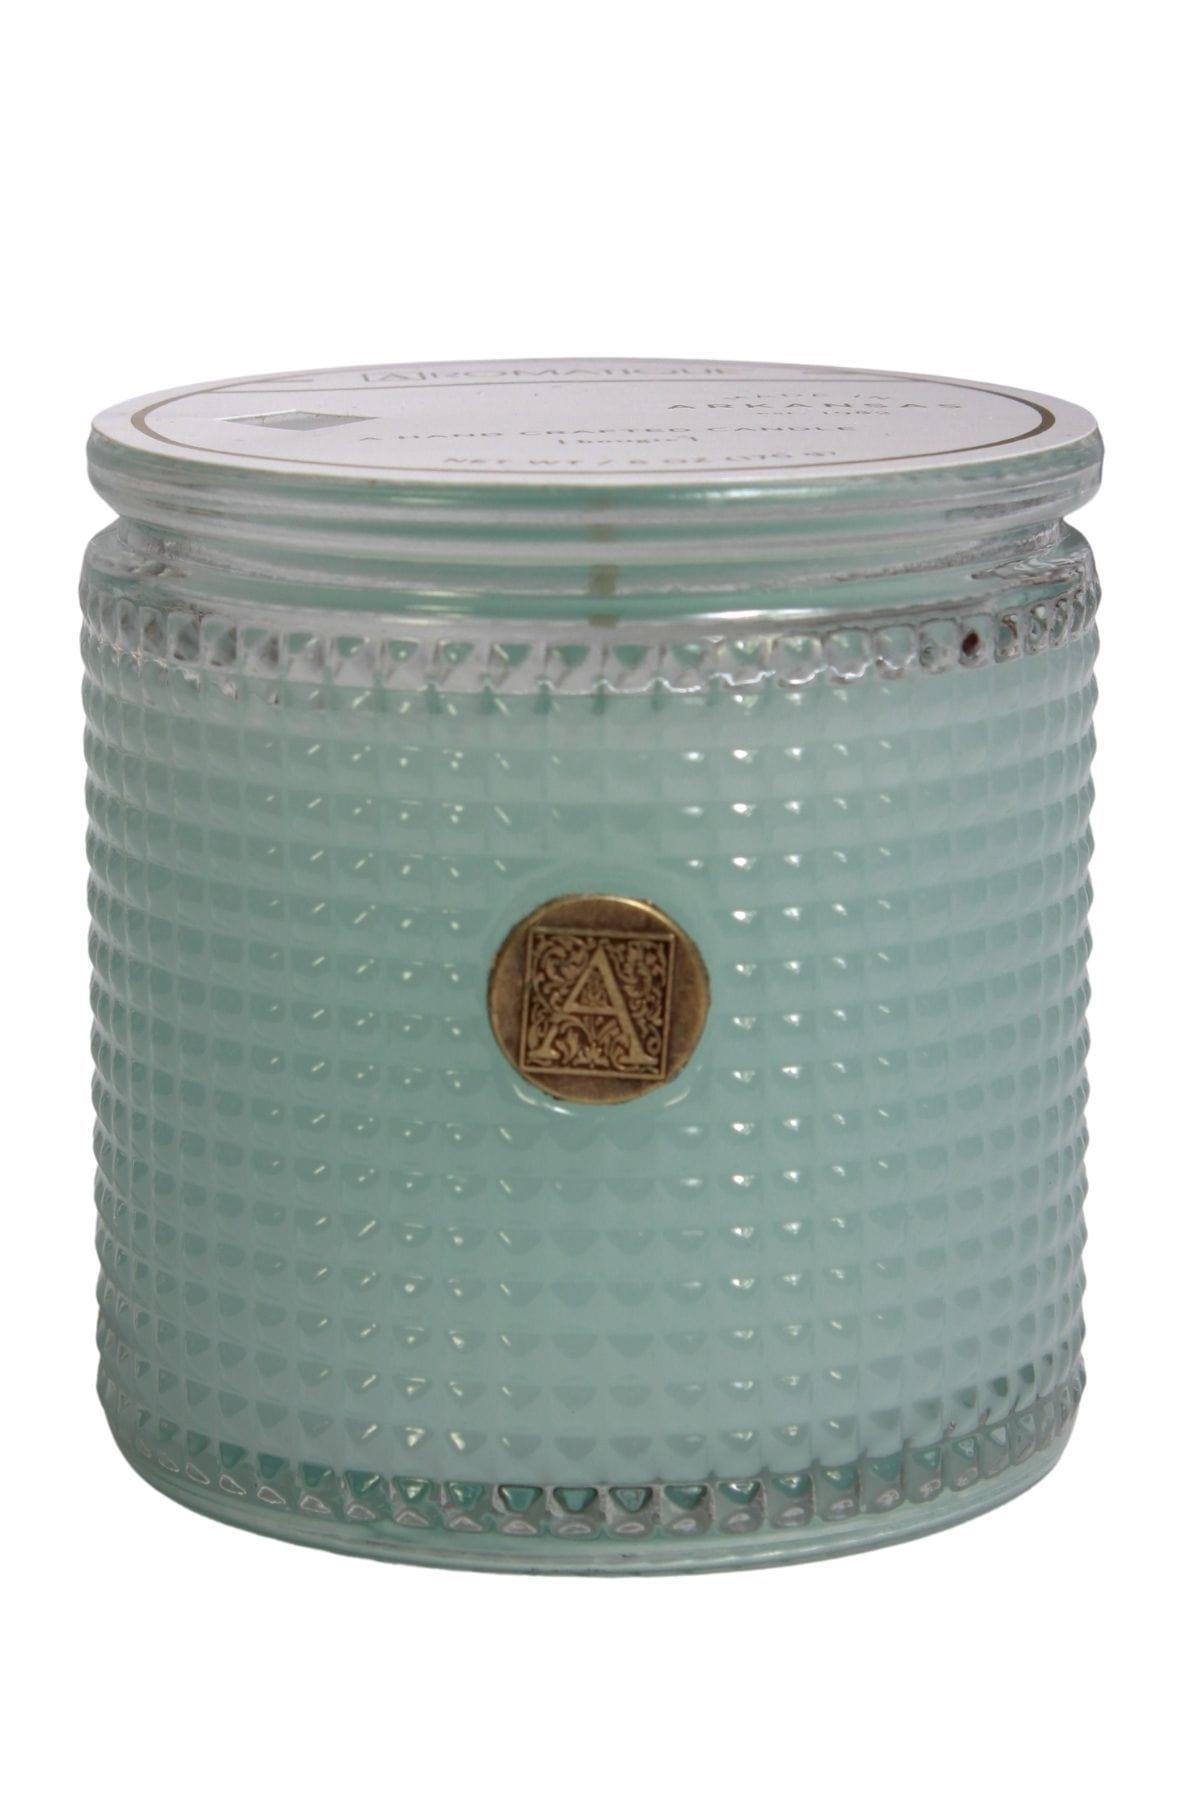 The Cotton Ginseng fragrance textured glass candle by Aromatique